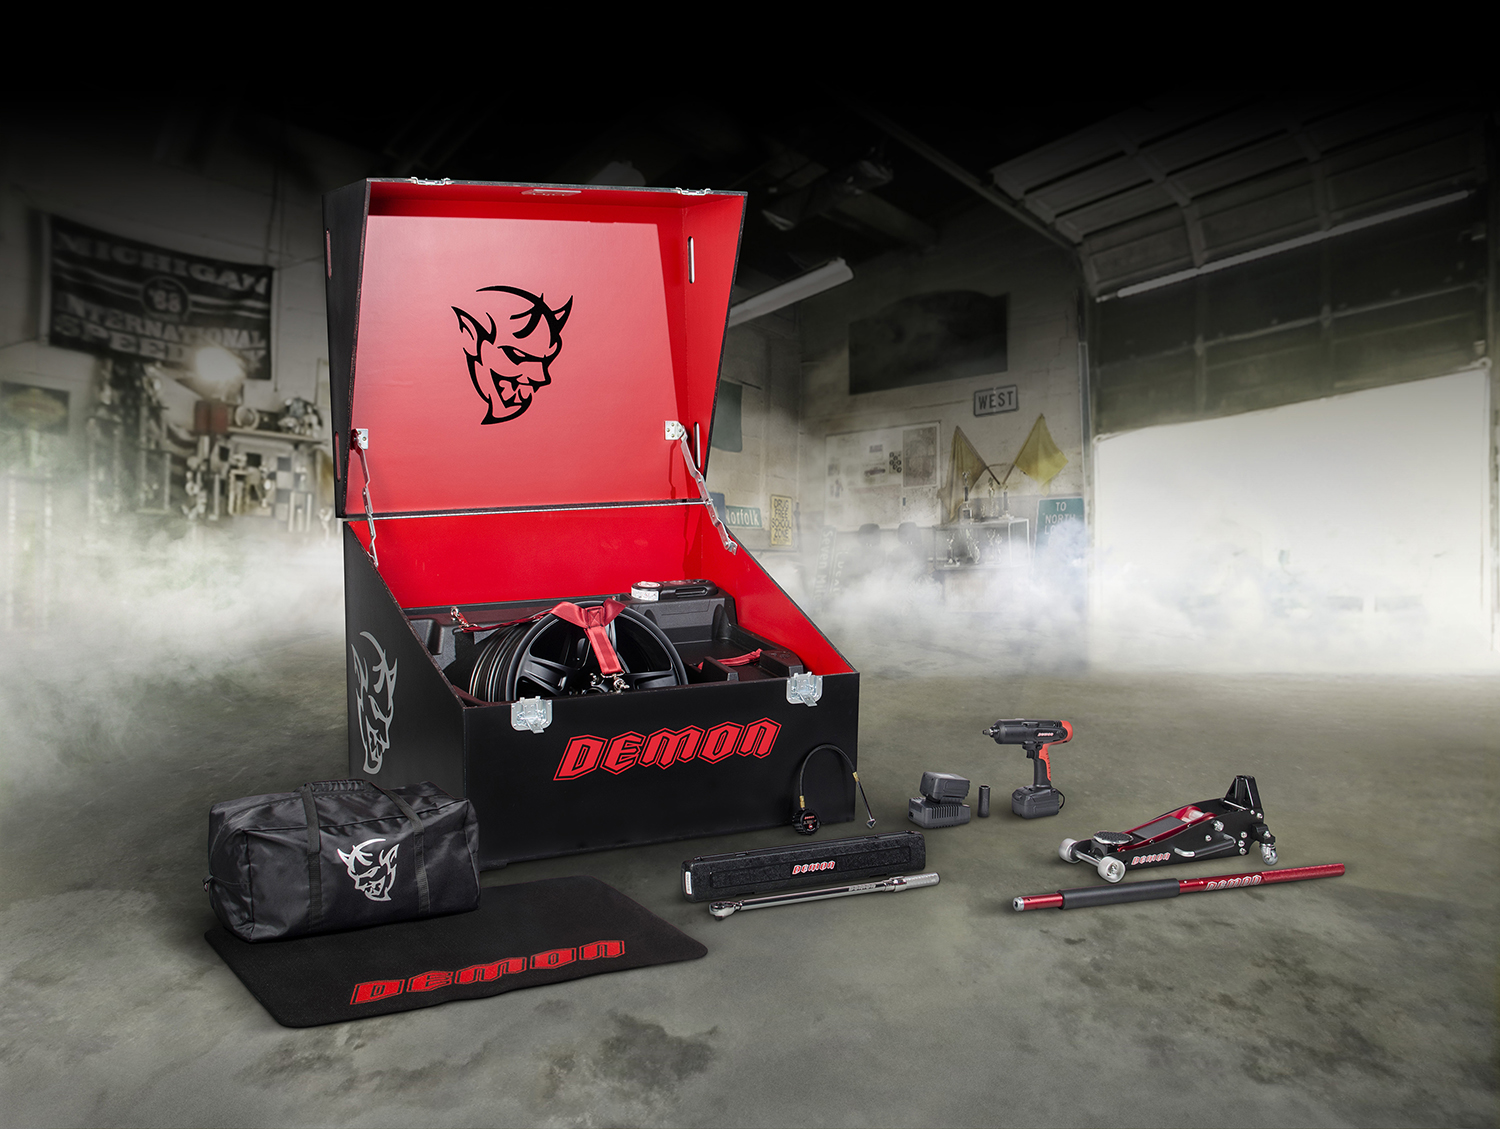 The Demon Crate delivers what customers need to take the 2018 Dodge Challenger SRT Demon from the street to the drag strip and back again. This is a special, limited-production set of tools for the Dodge Challenger SRT Demon that offers a street-to-track transformation experience as exclusive as the car itself.